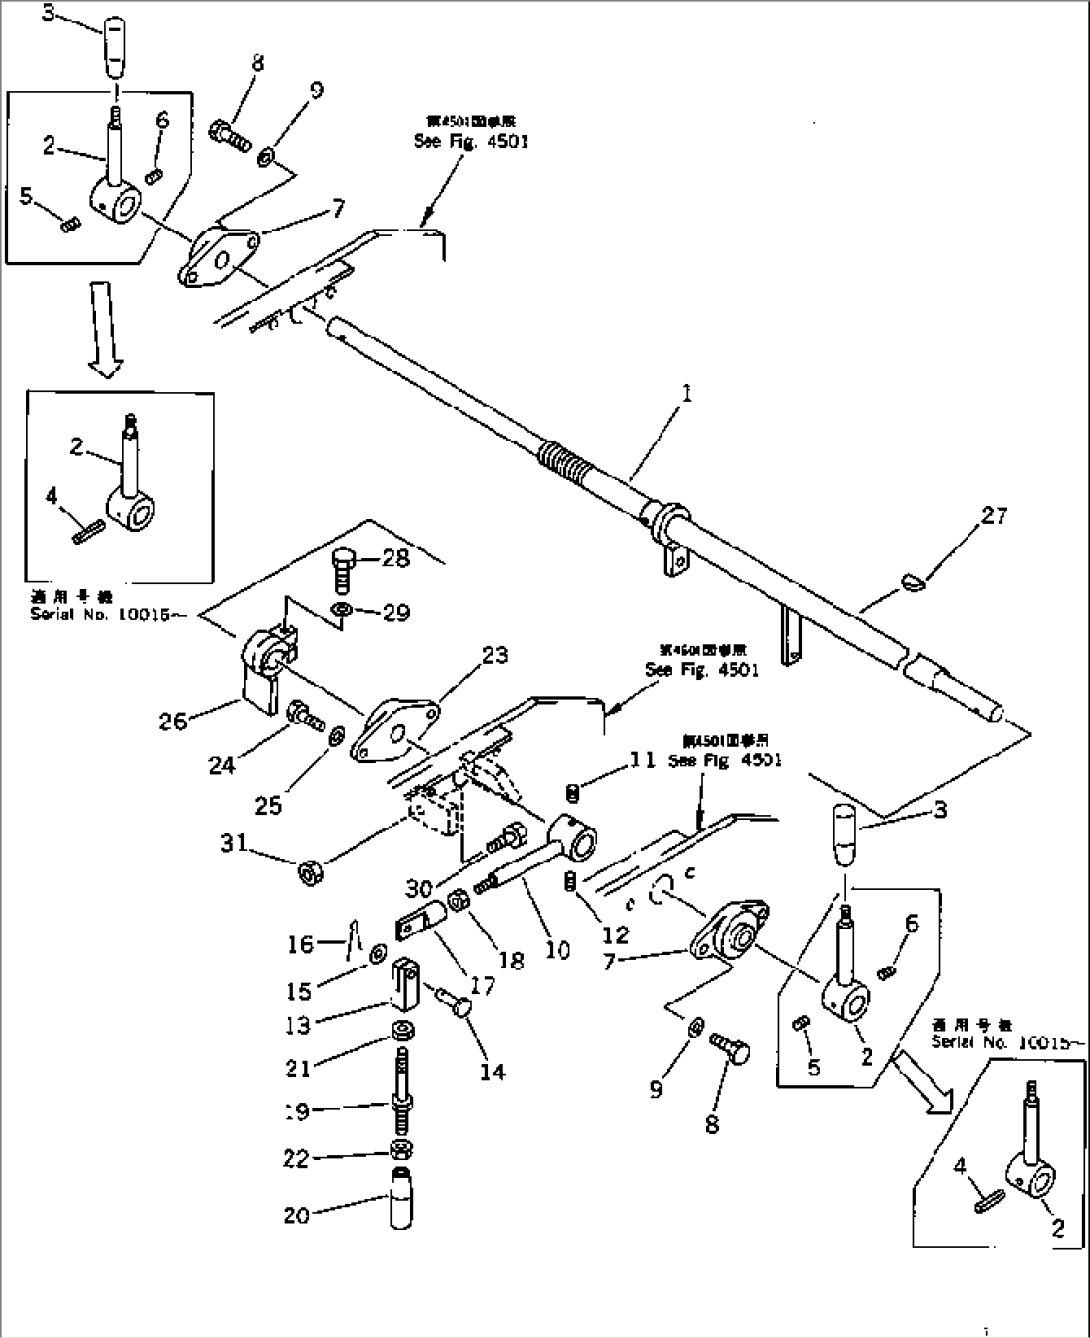 ROTOR REVOLUTION CONTROL (LEVER AND LINKAGE) (1/3)